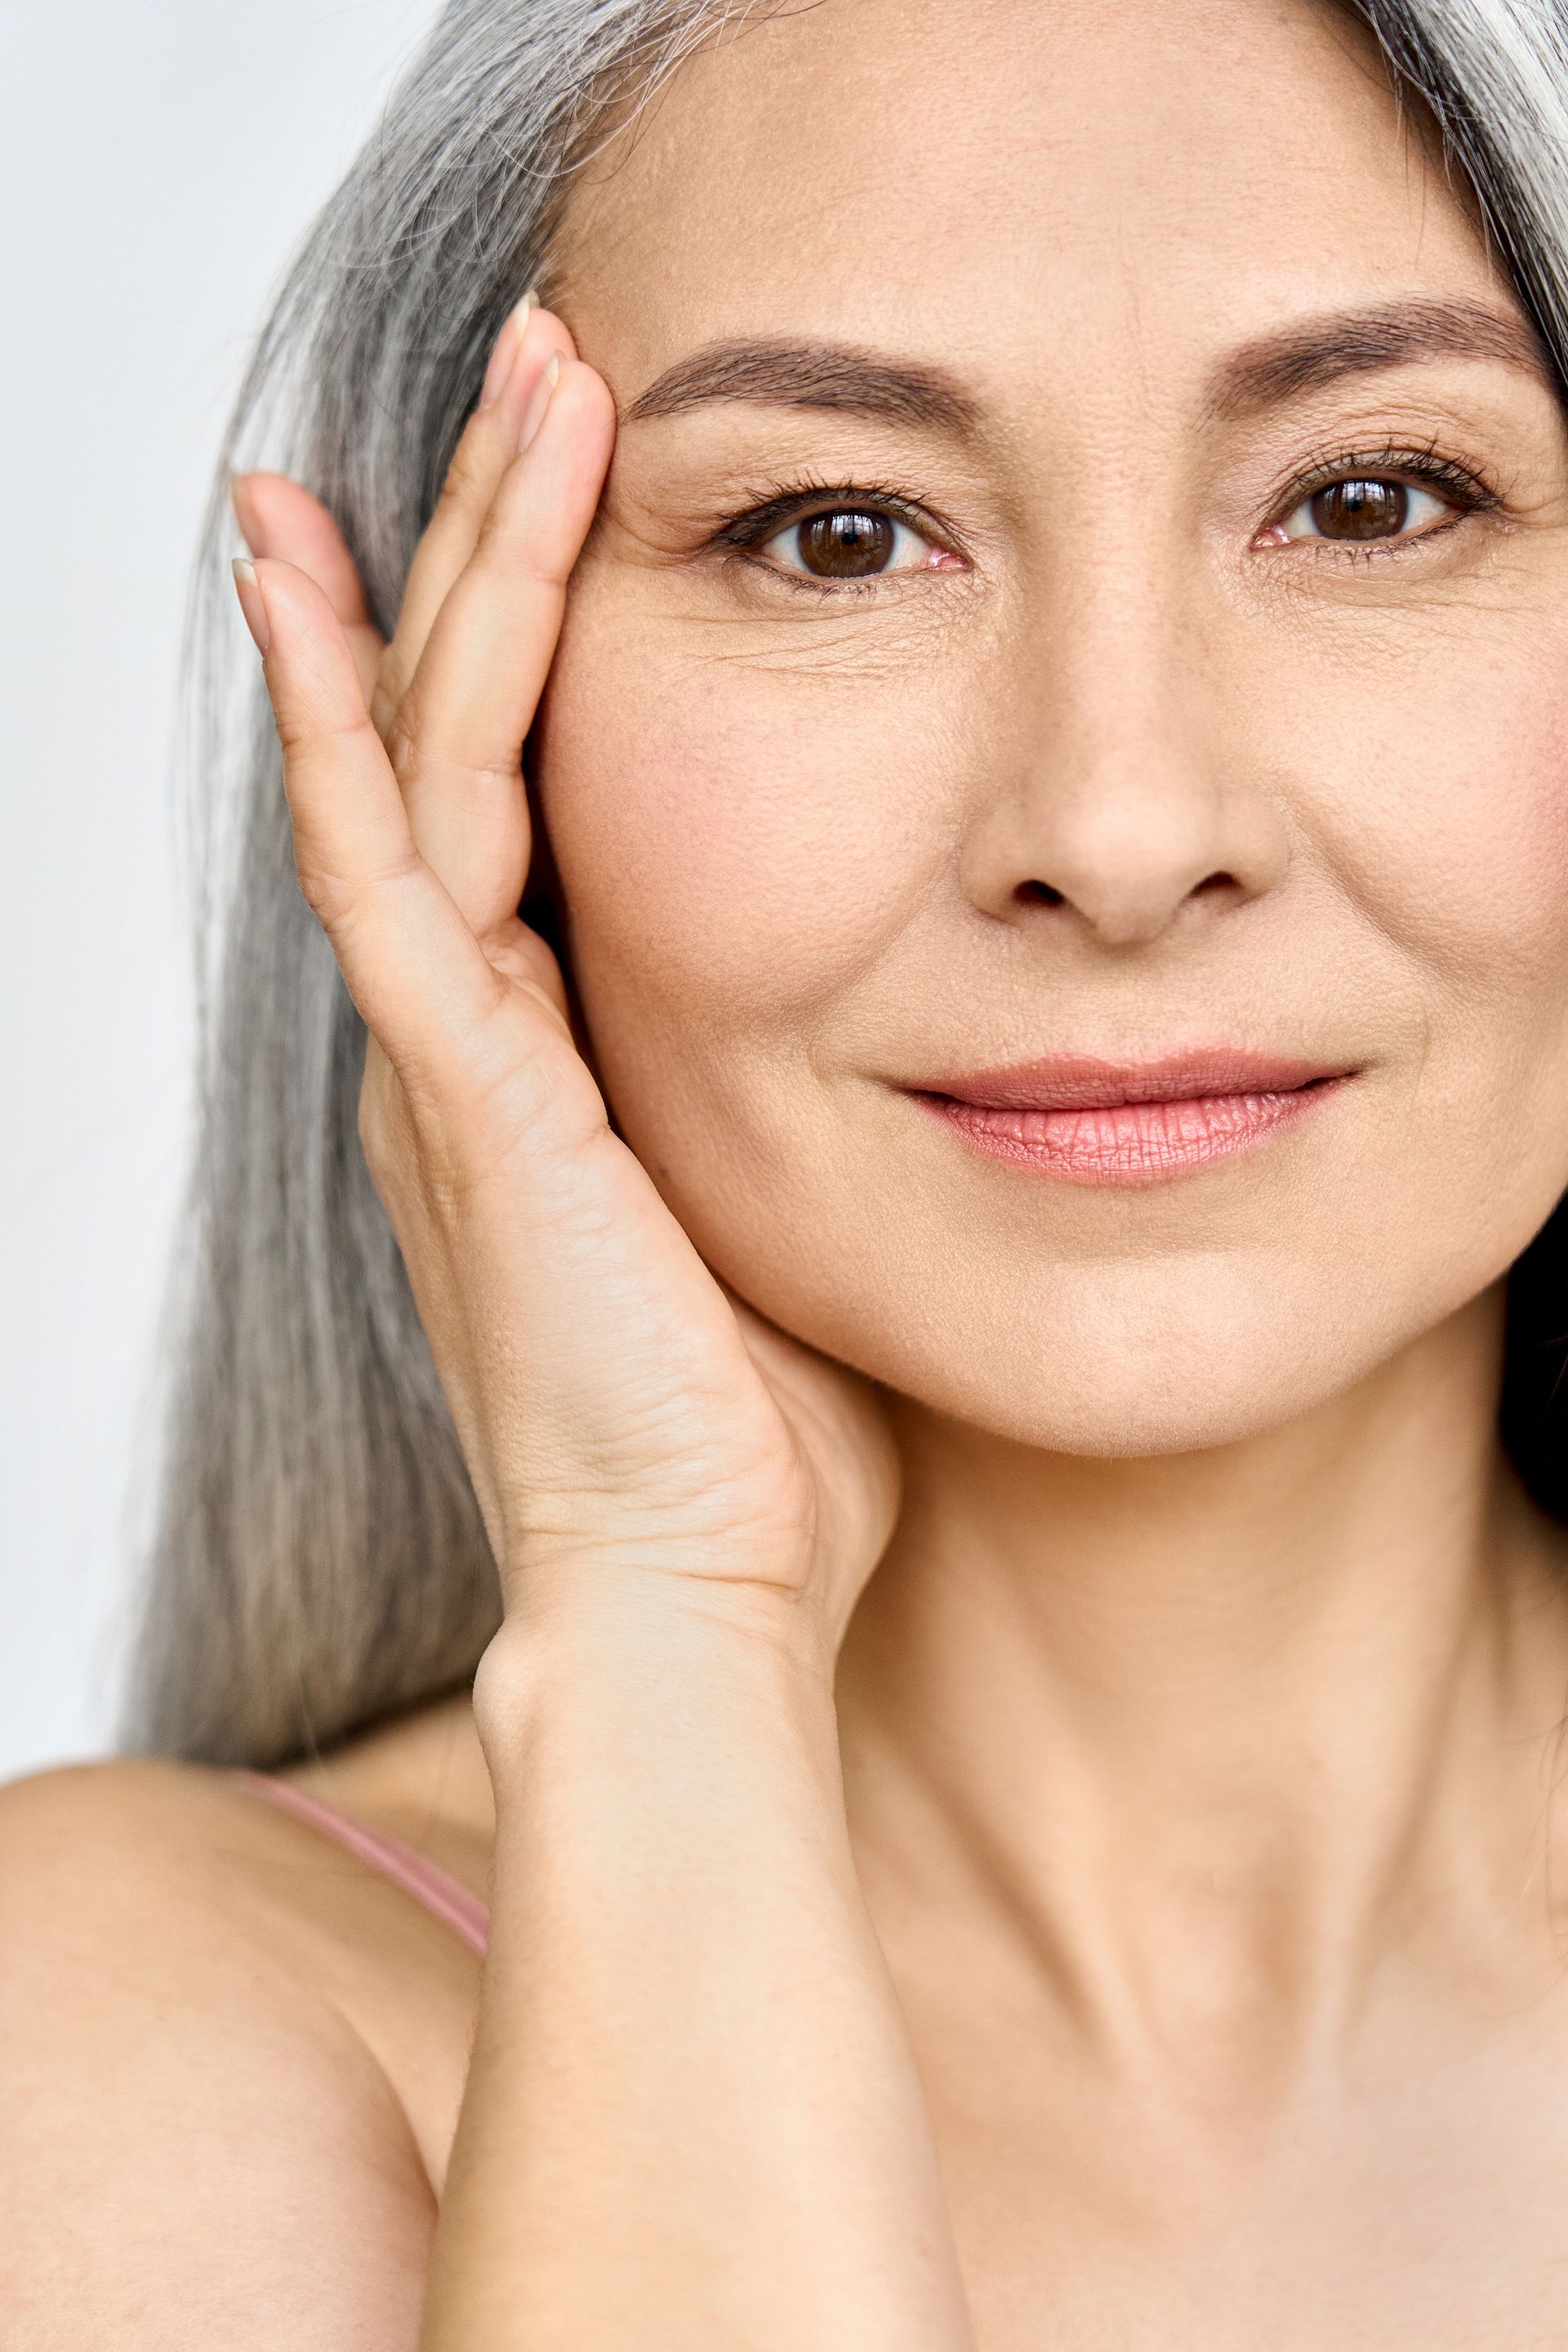 a woman with gray hair is touching her face with her hand and smiling .